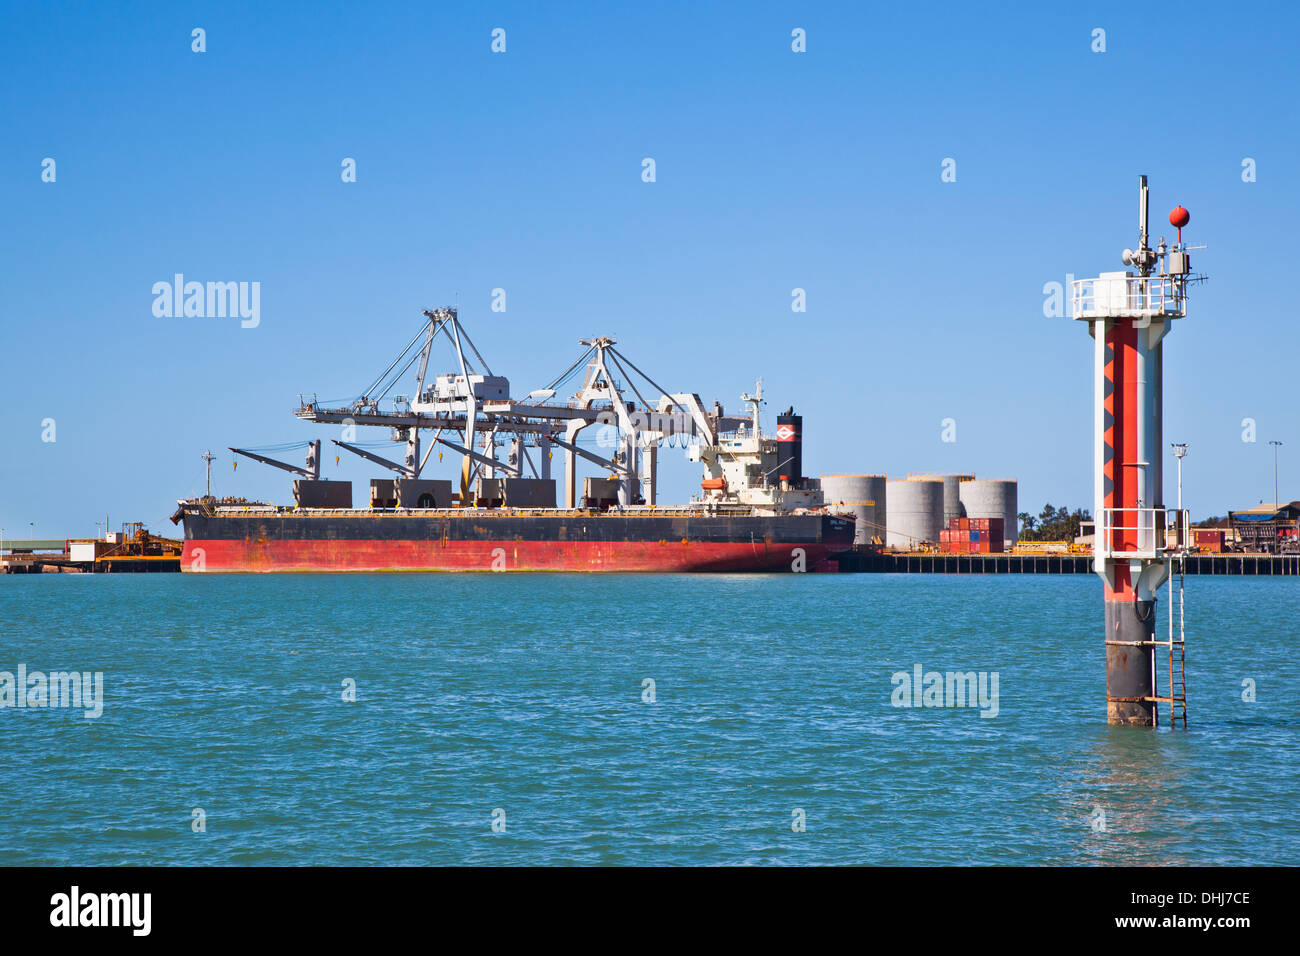 Australia, North Queensland, Port of Townsville, cargo ship at Berth 3 for container and Break Bulk handling Stock Photo